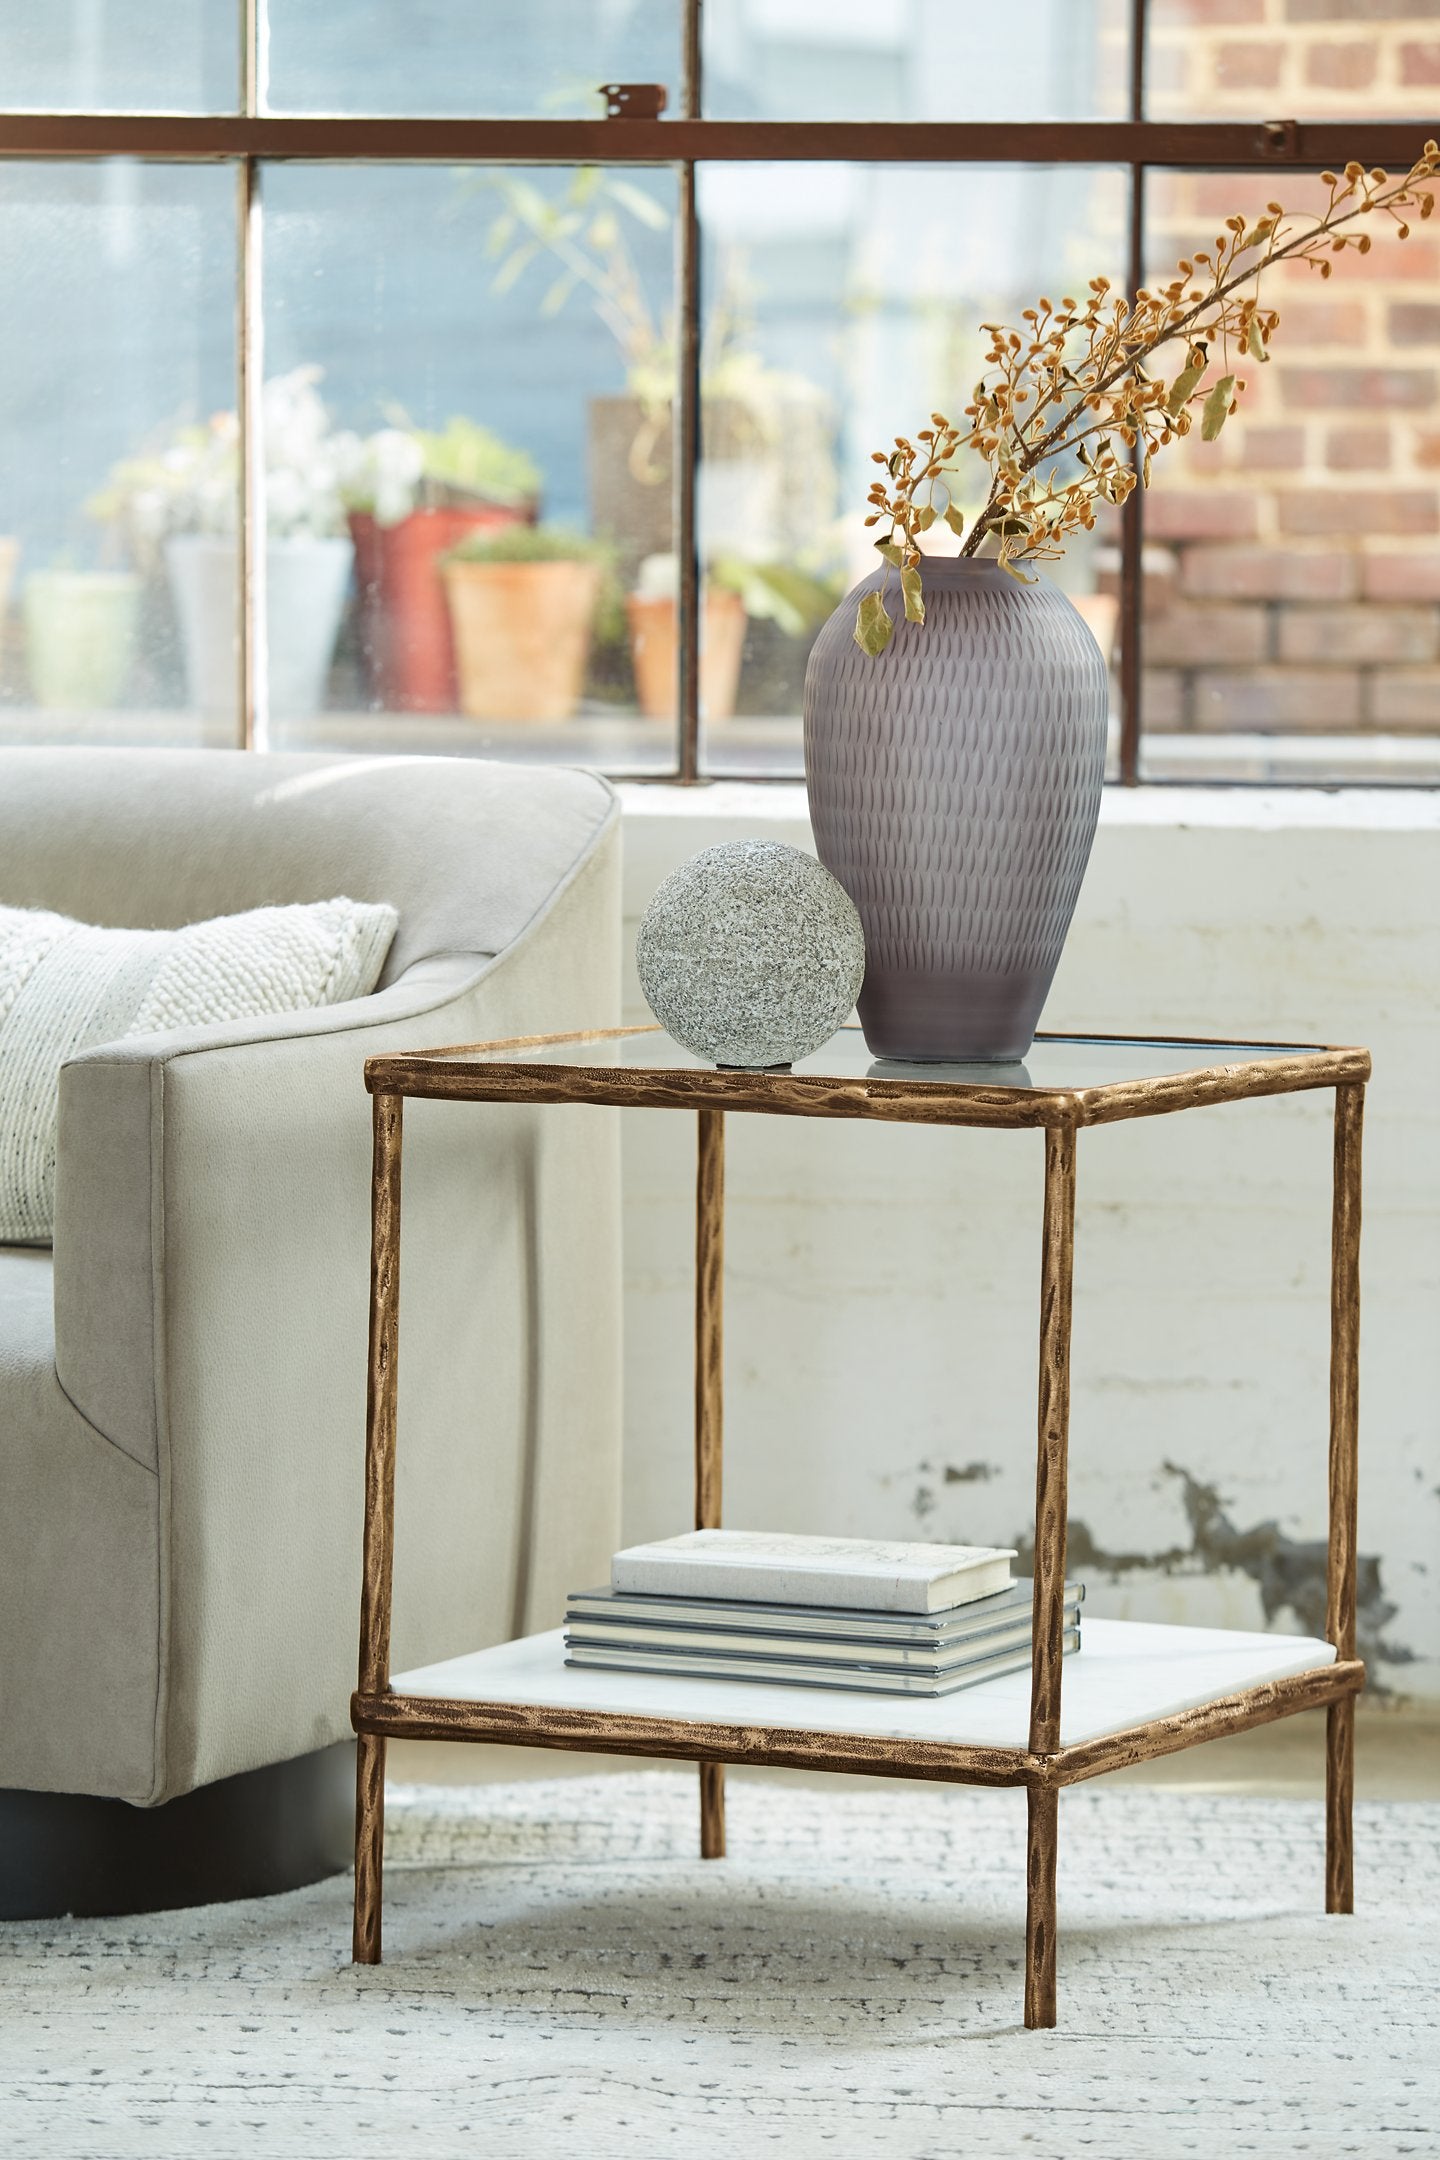 Ryandale Accent Table - Half Price Furniture